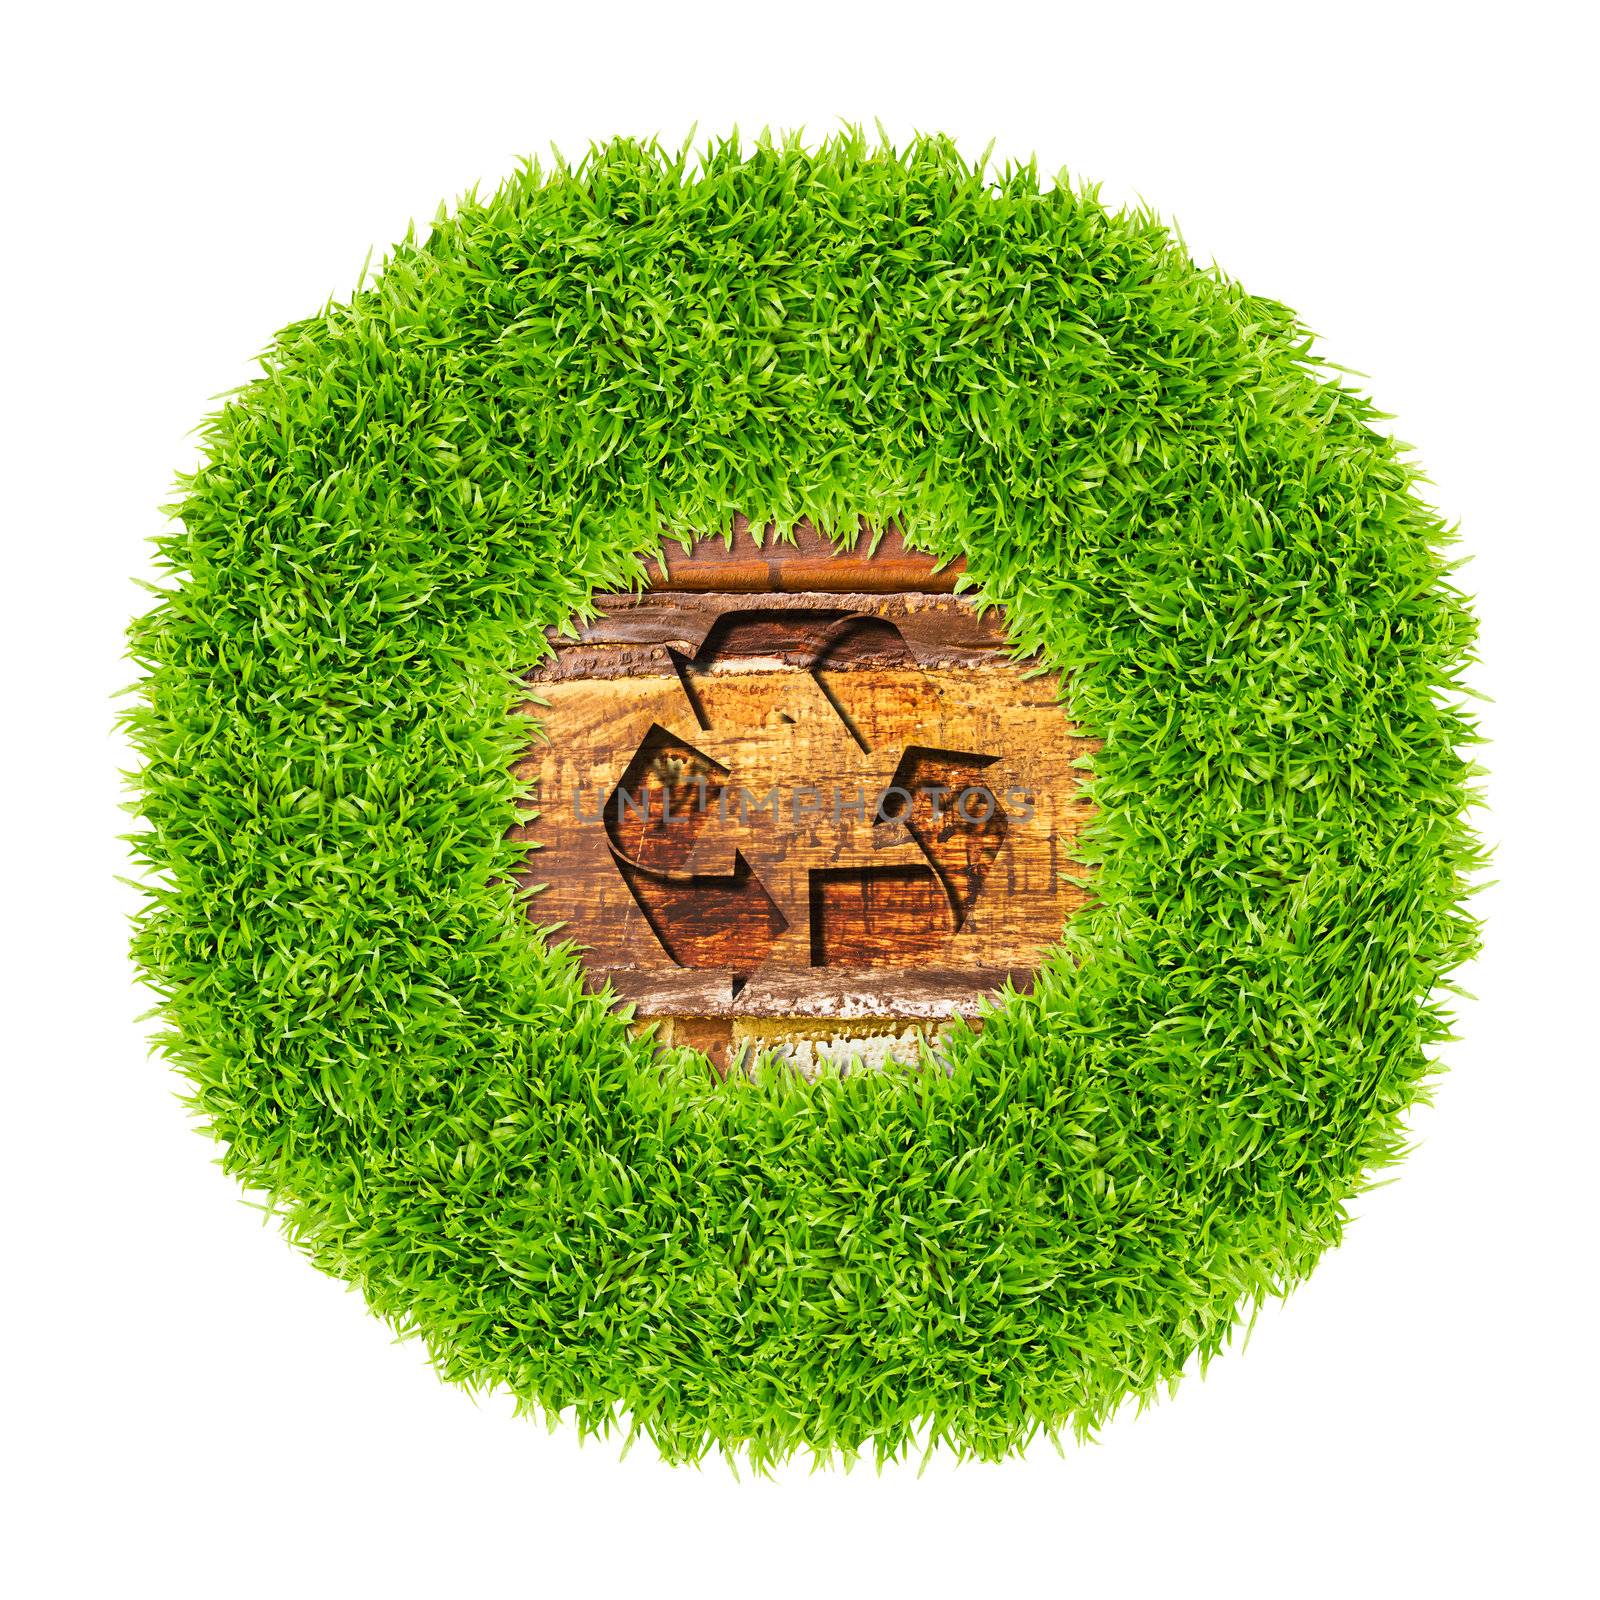 recycle sign and green grass on wood background